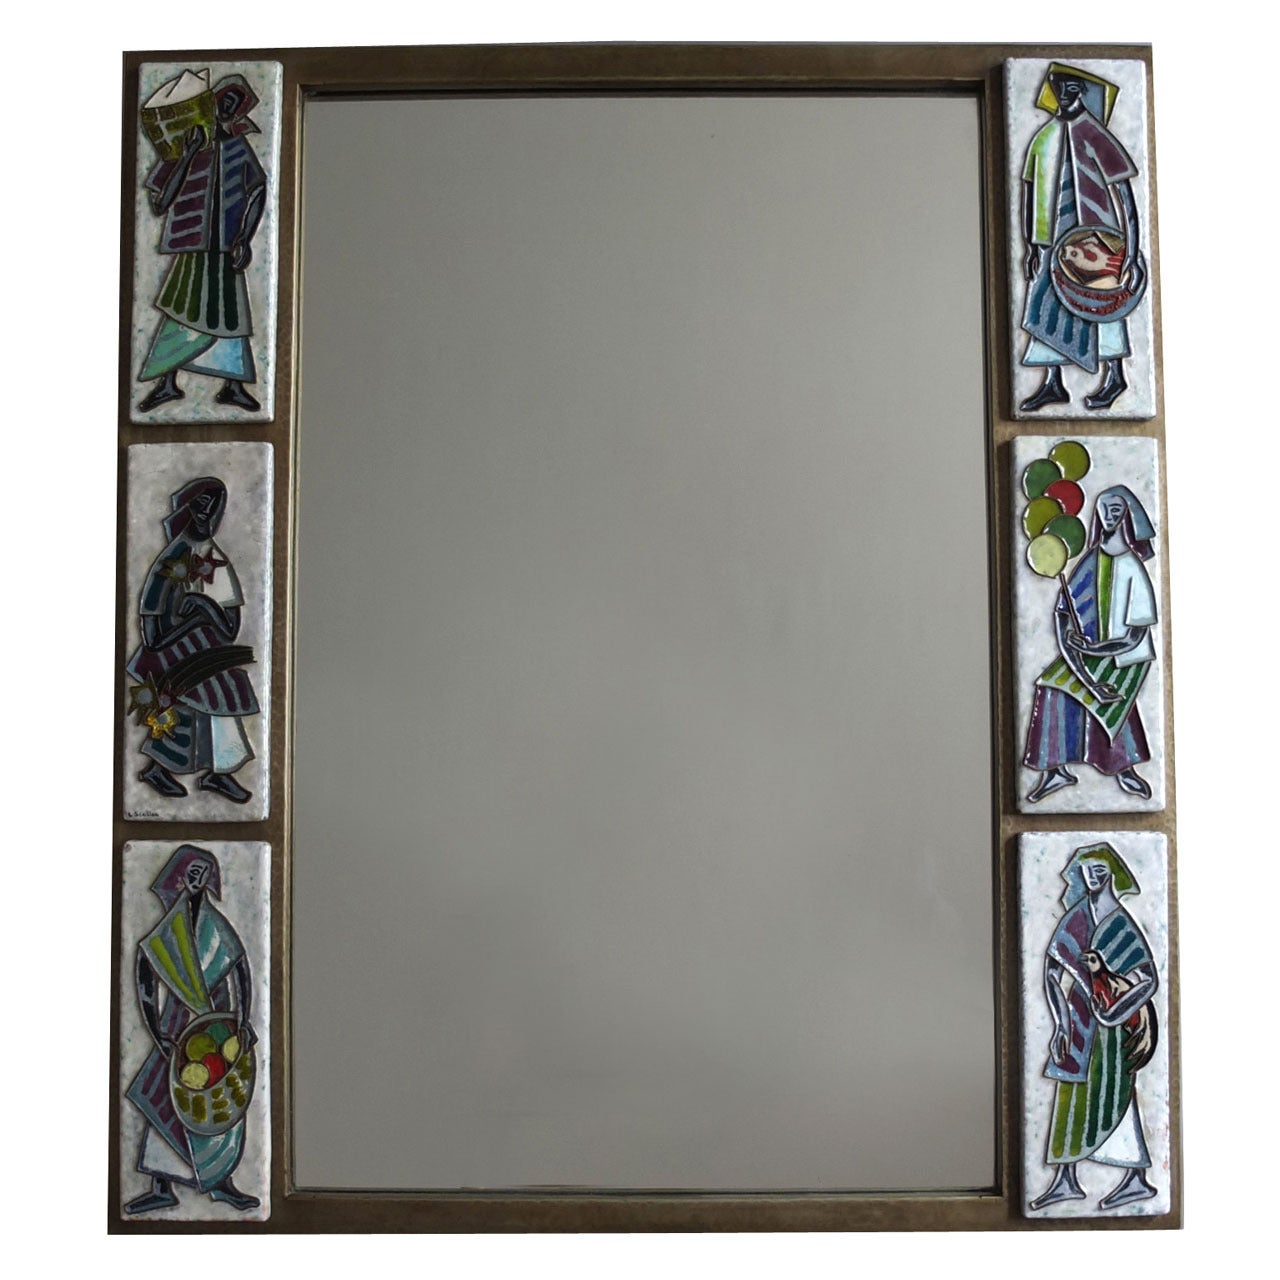 A Fine French 1960s Metal and Ceramic Framed Mirror by Scaillon For Sale